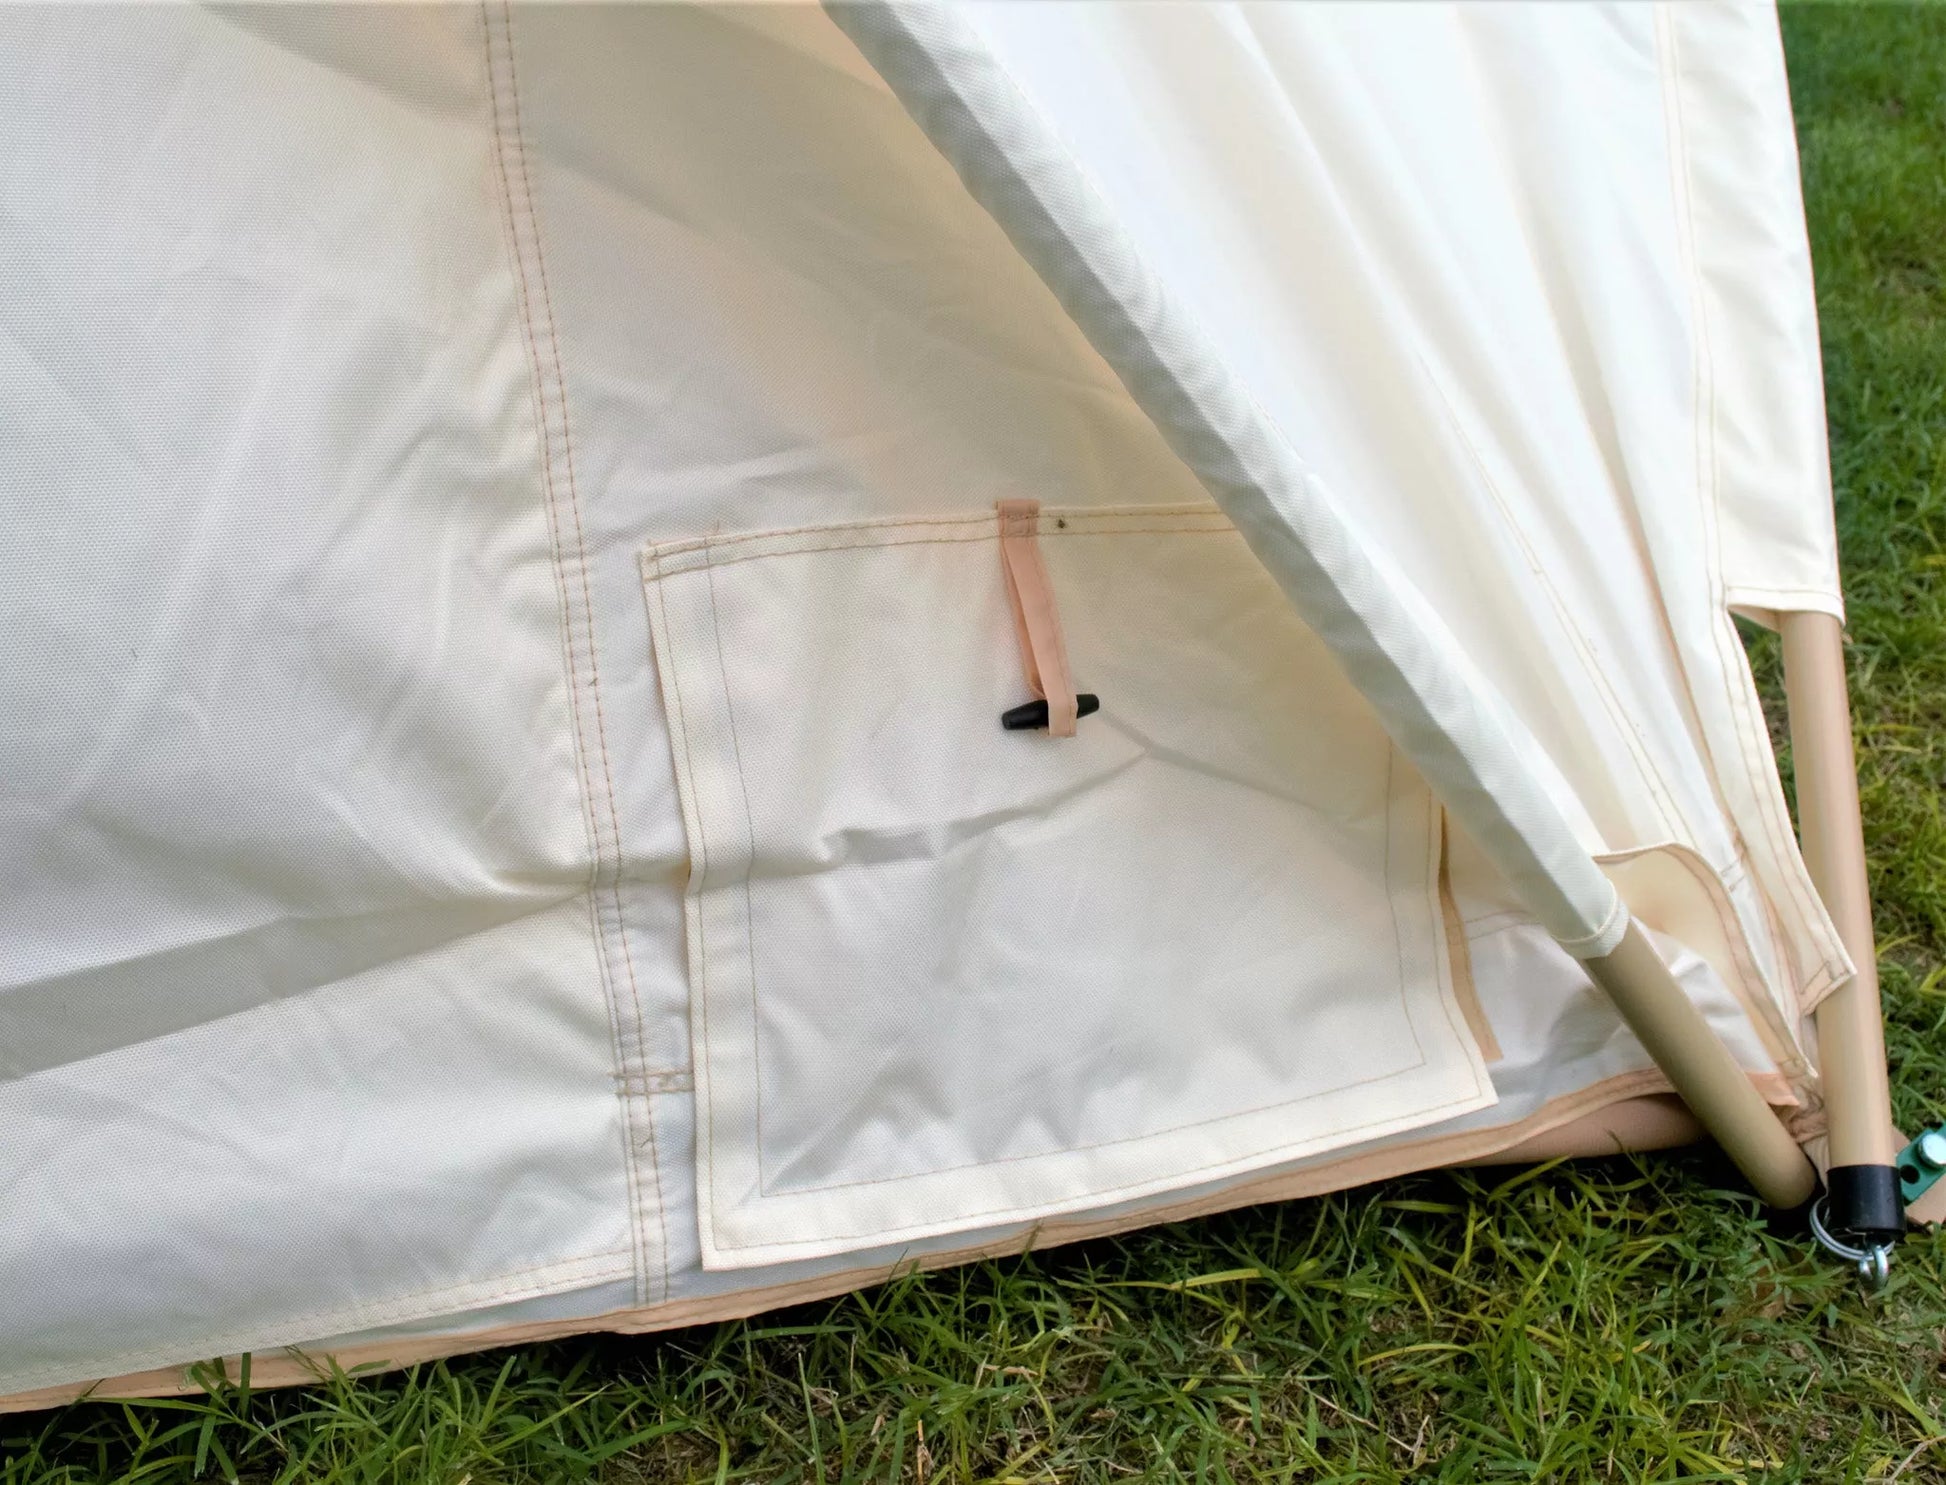 Pyramid tent's ingenious duct inlet: seamlessly run extension cords or channel your AC exhaust for ultimate comfort